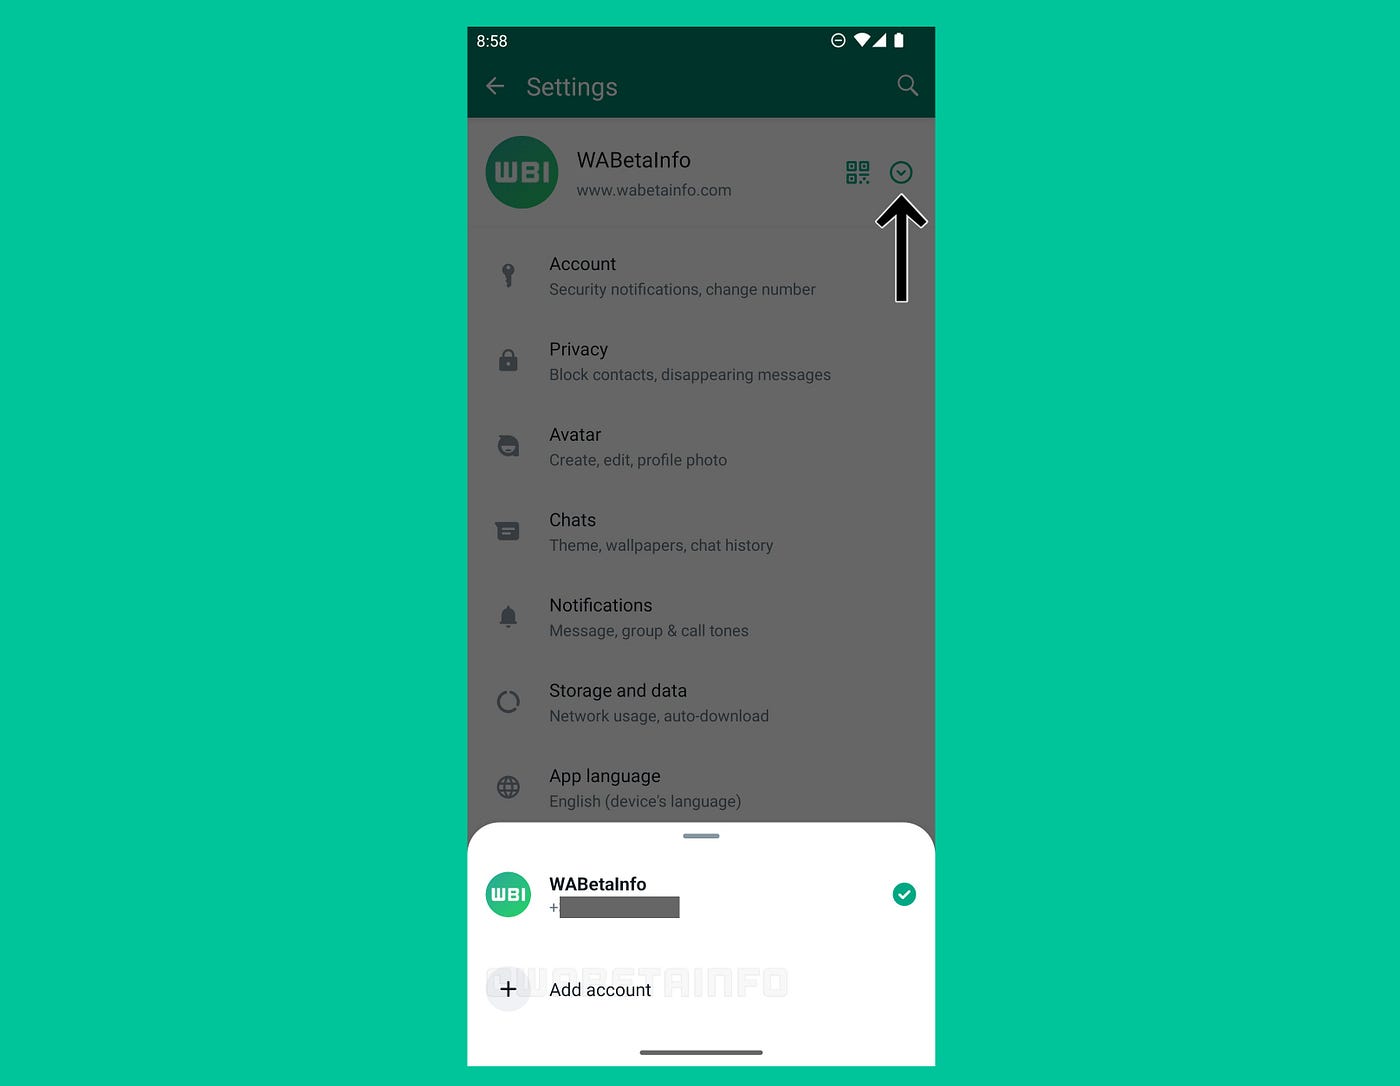 WhatsApp is introducing profile photos in notifications